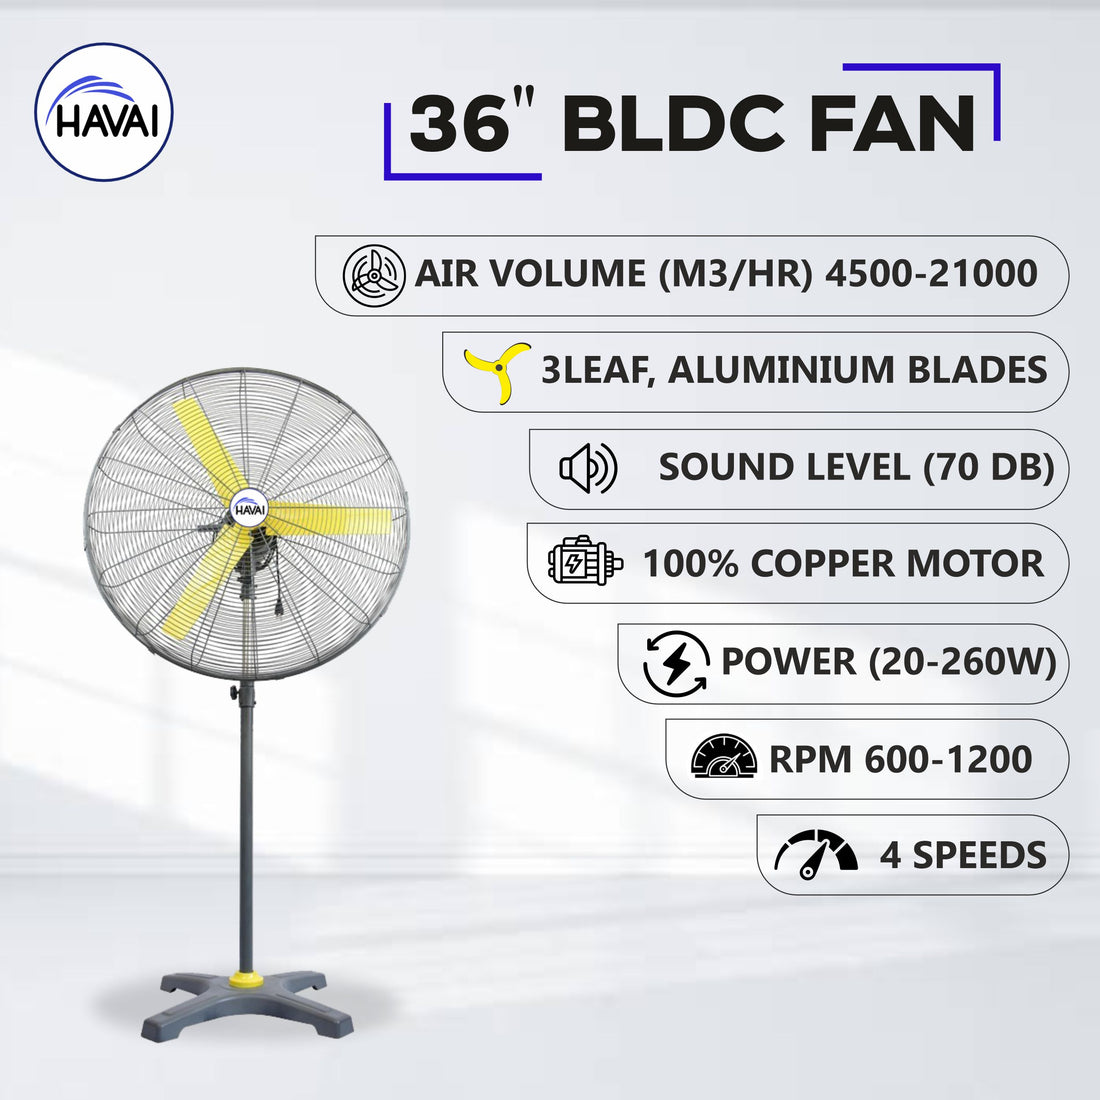 HAVAI BLDC Pedestal Fan 36 inch, 50% Savings on Electricity, High Velocity, Heavy Duty Metal for Industrial, Commercial and Residential Use, Assembly Included